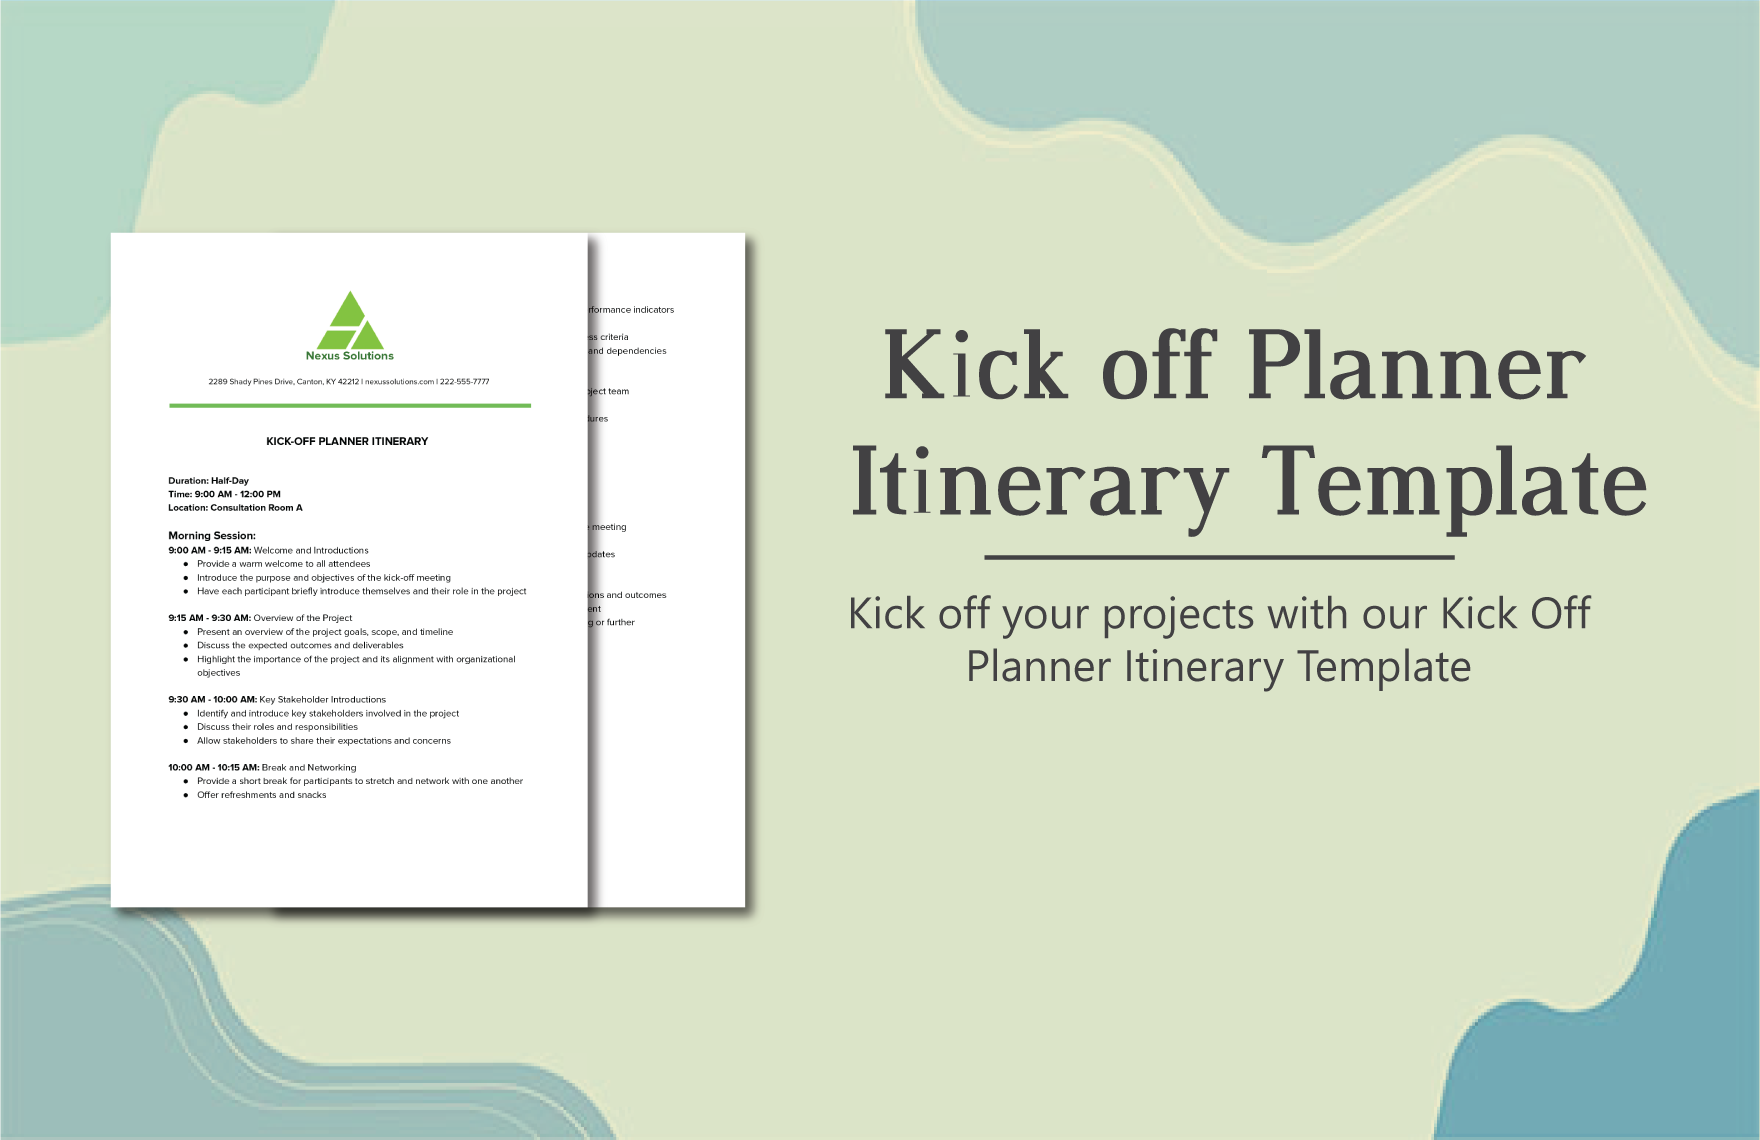 Kick off Planner Itinerary Template